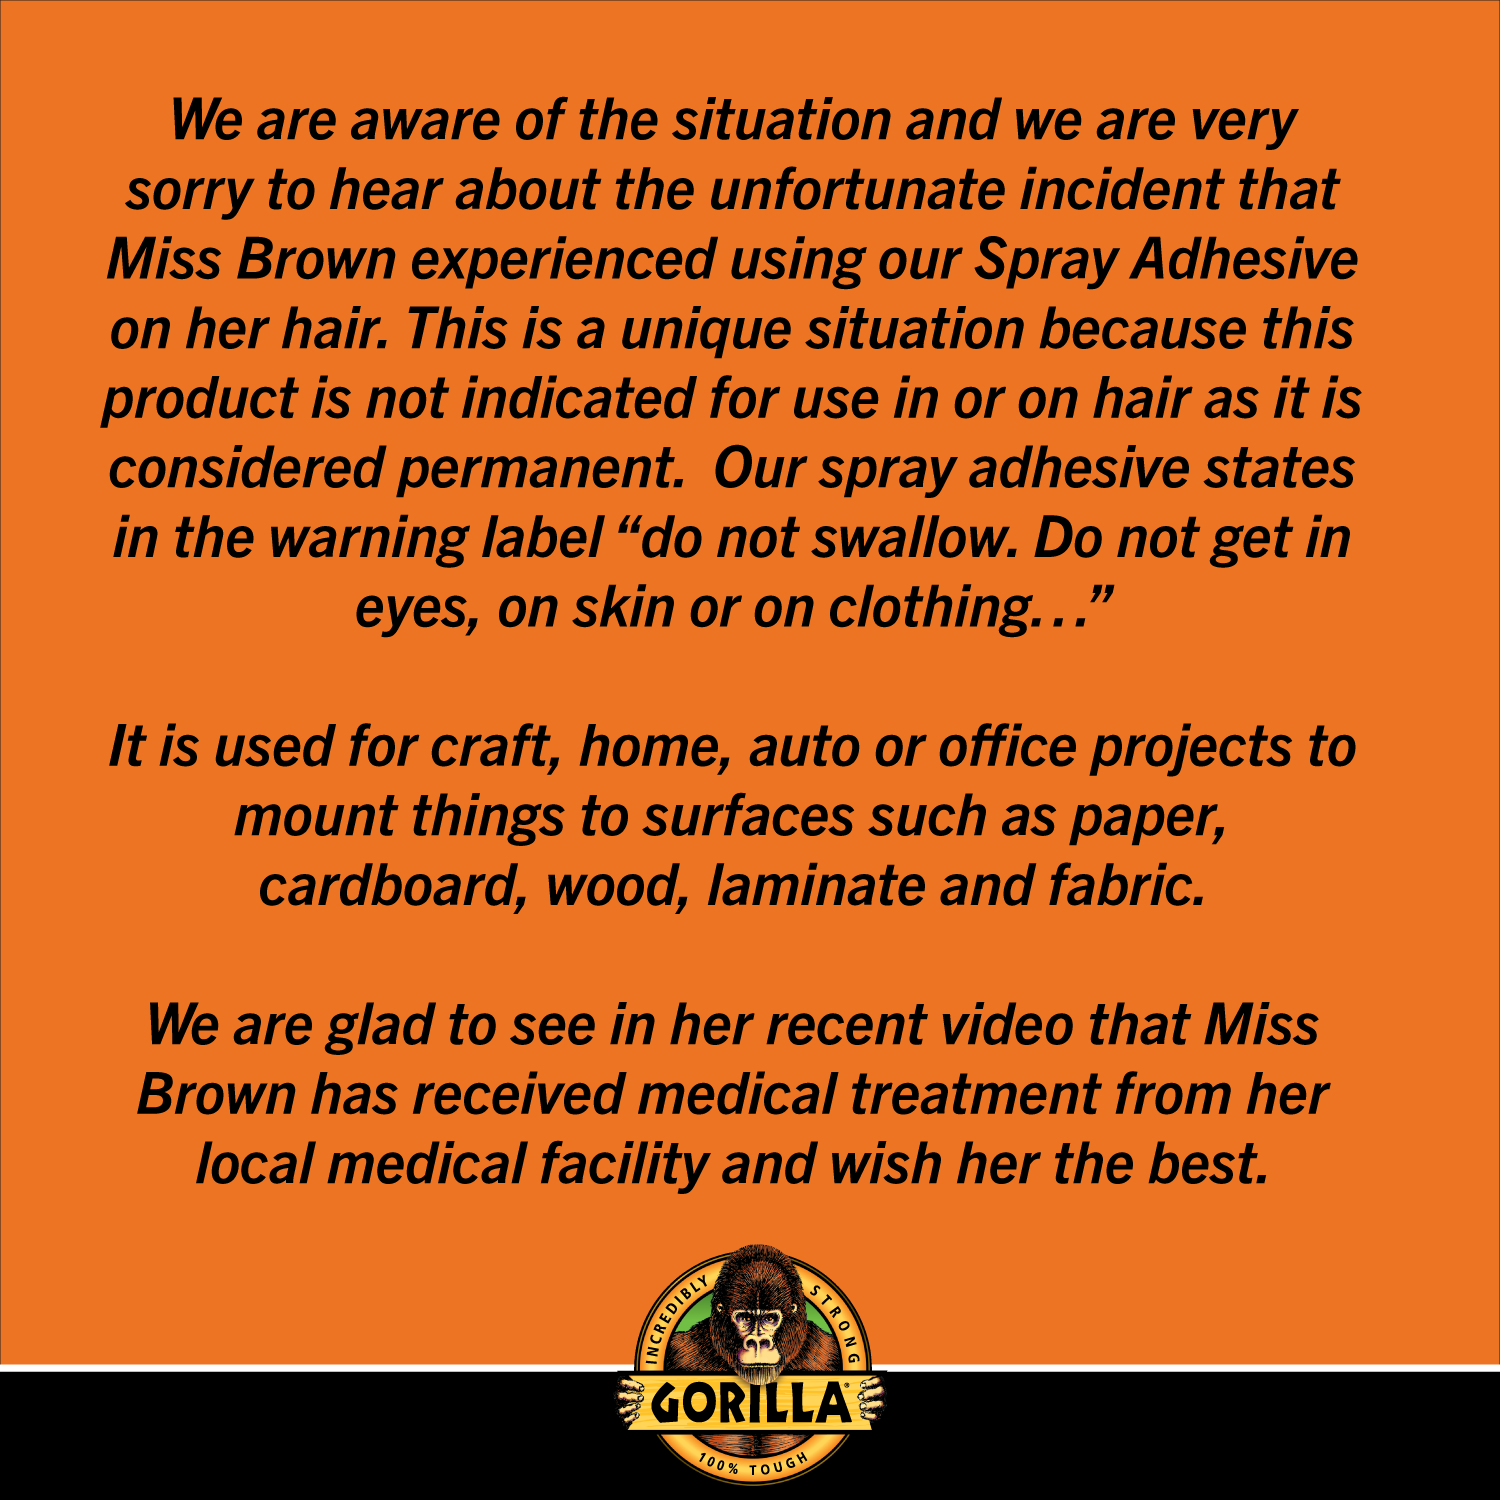 Gorilla Glue on X: We are very sorry to hear about the unfortunate  incident that Miss Brown experienced using our Spray Adhesive on her hair.  We are glad to see in her